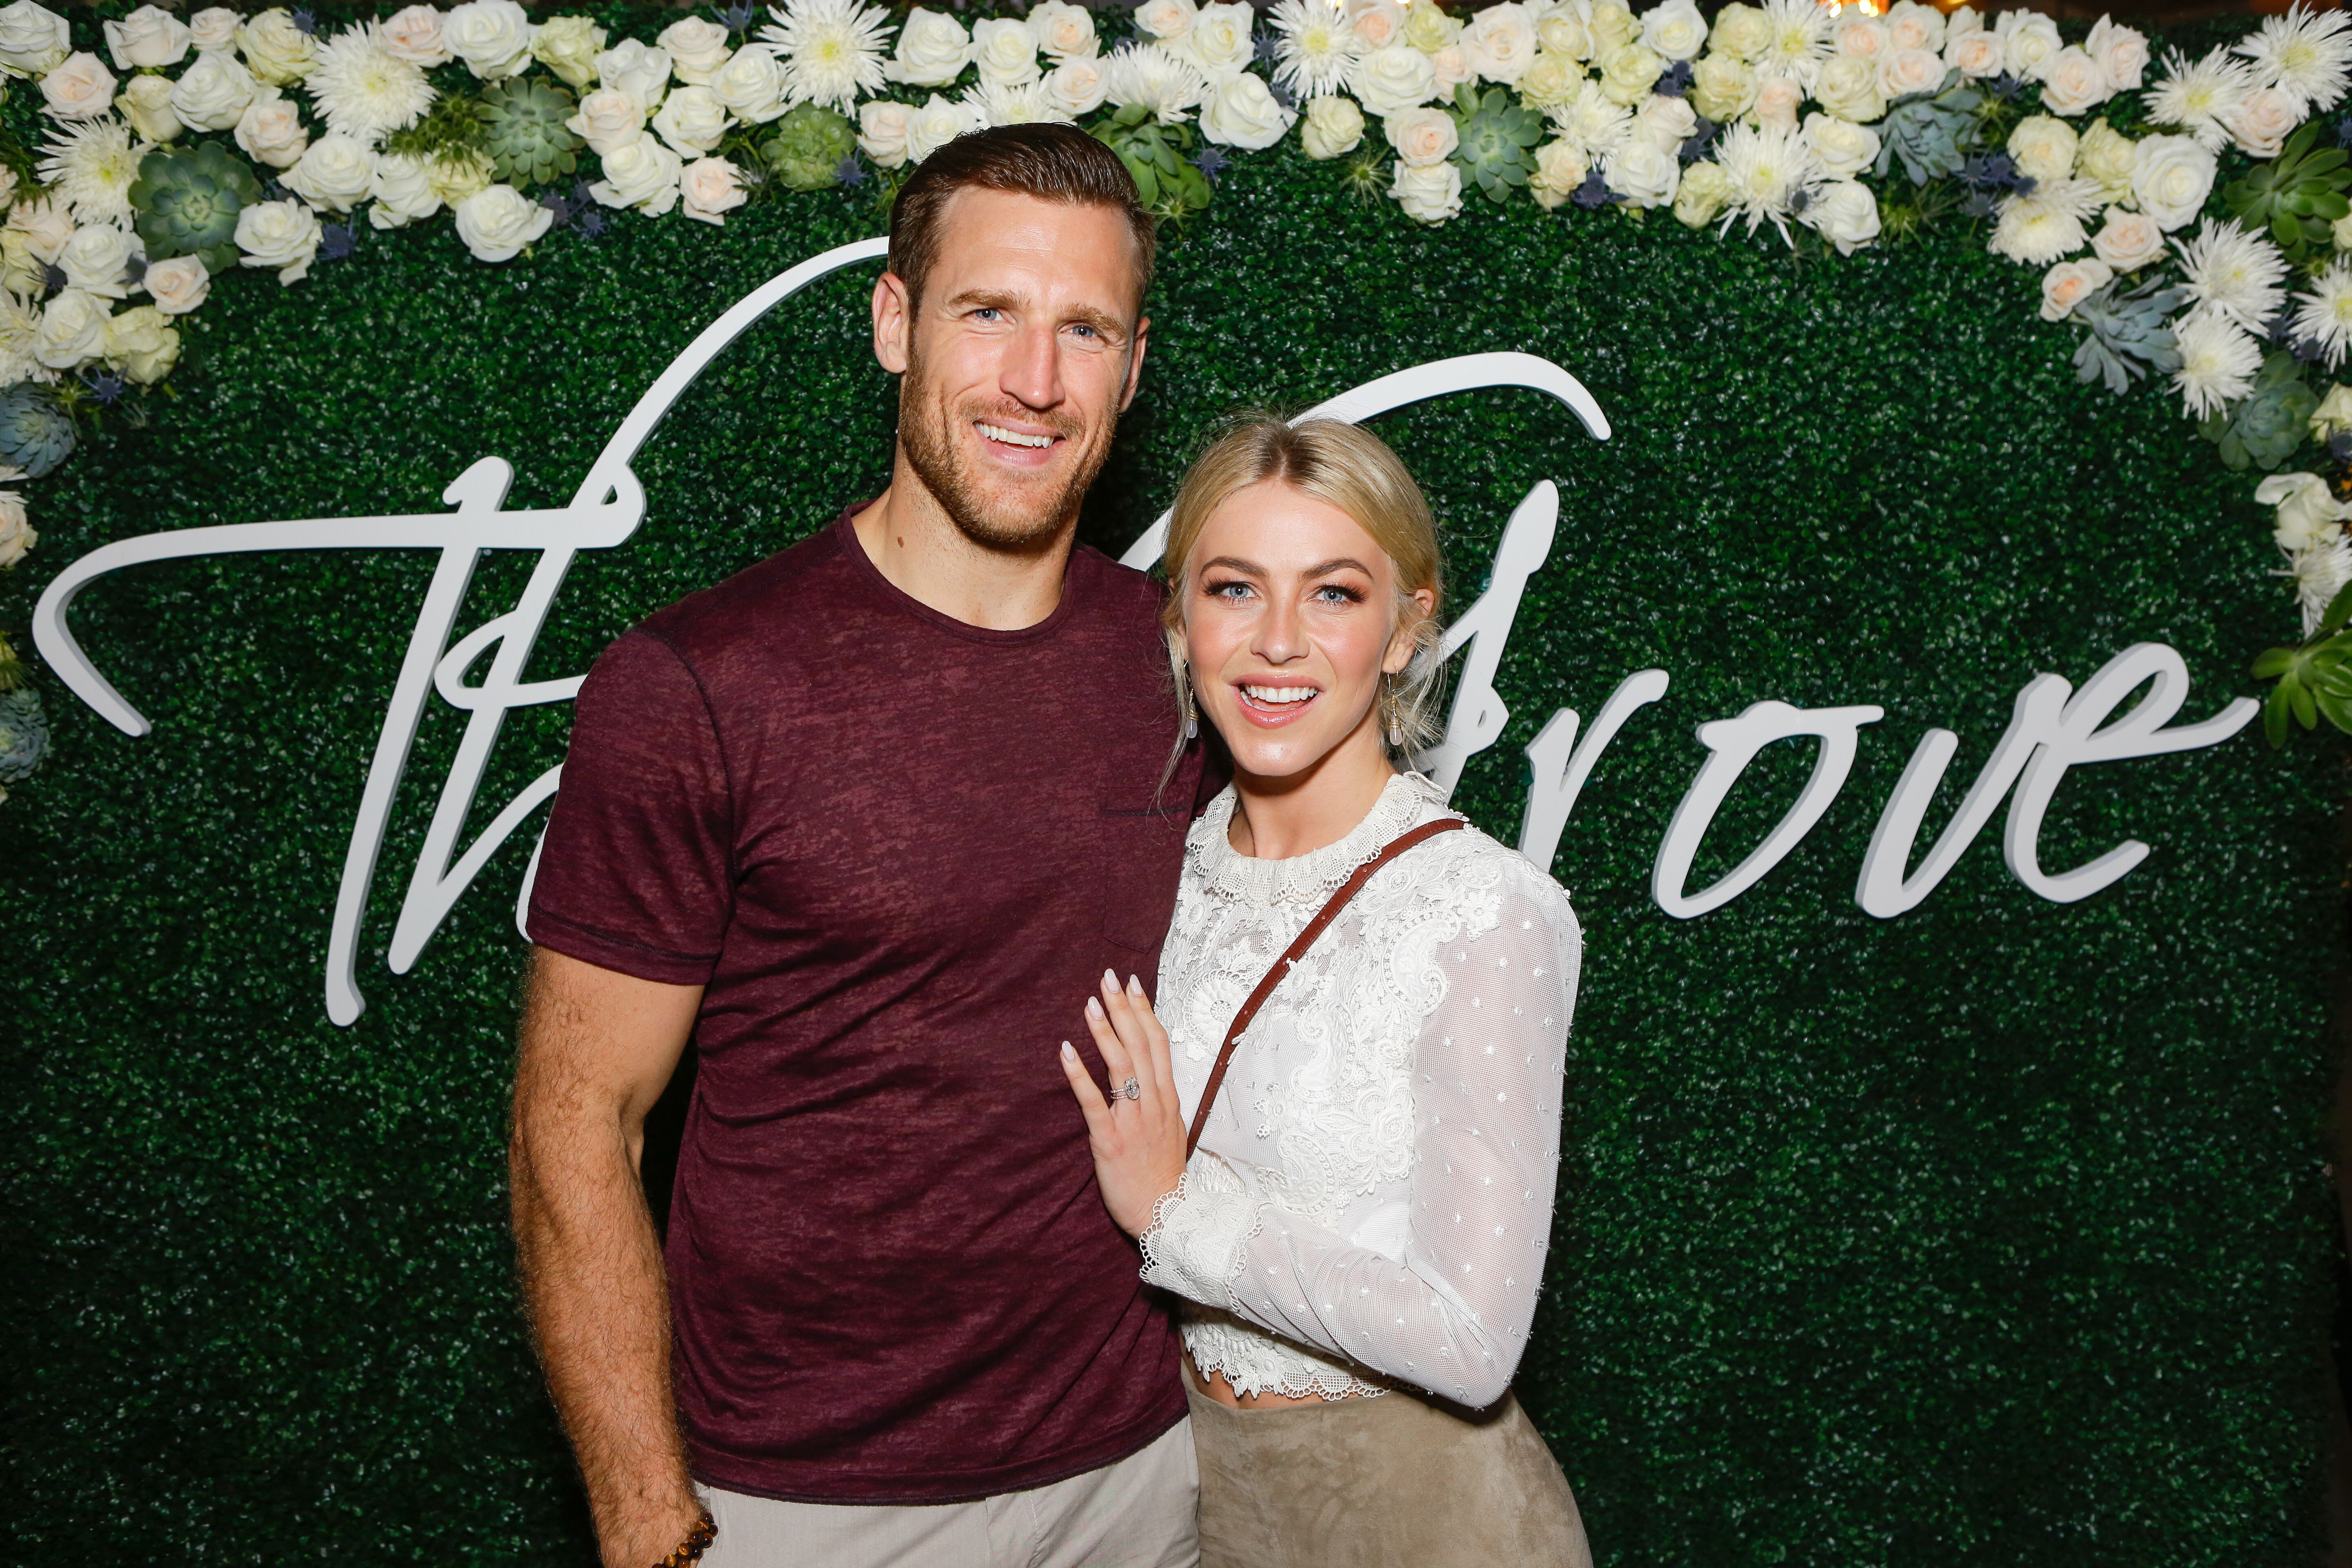 Brooks Laich and Julianne Hough at the Paint & Sip & Help event on October 12, 2017, in Los Angeles, California | Photo: Getty Images